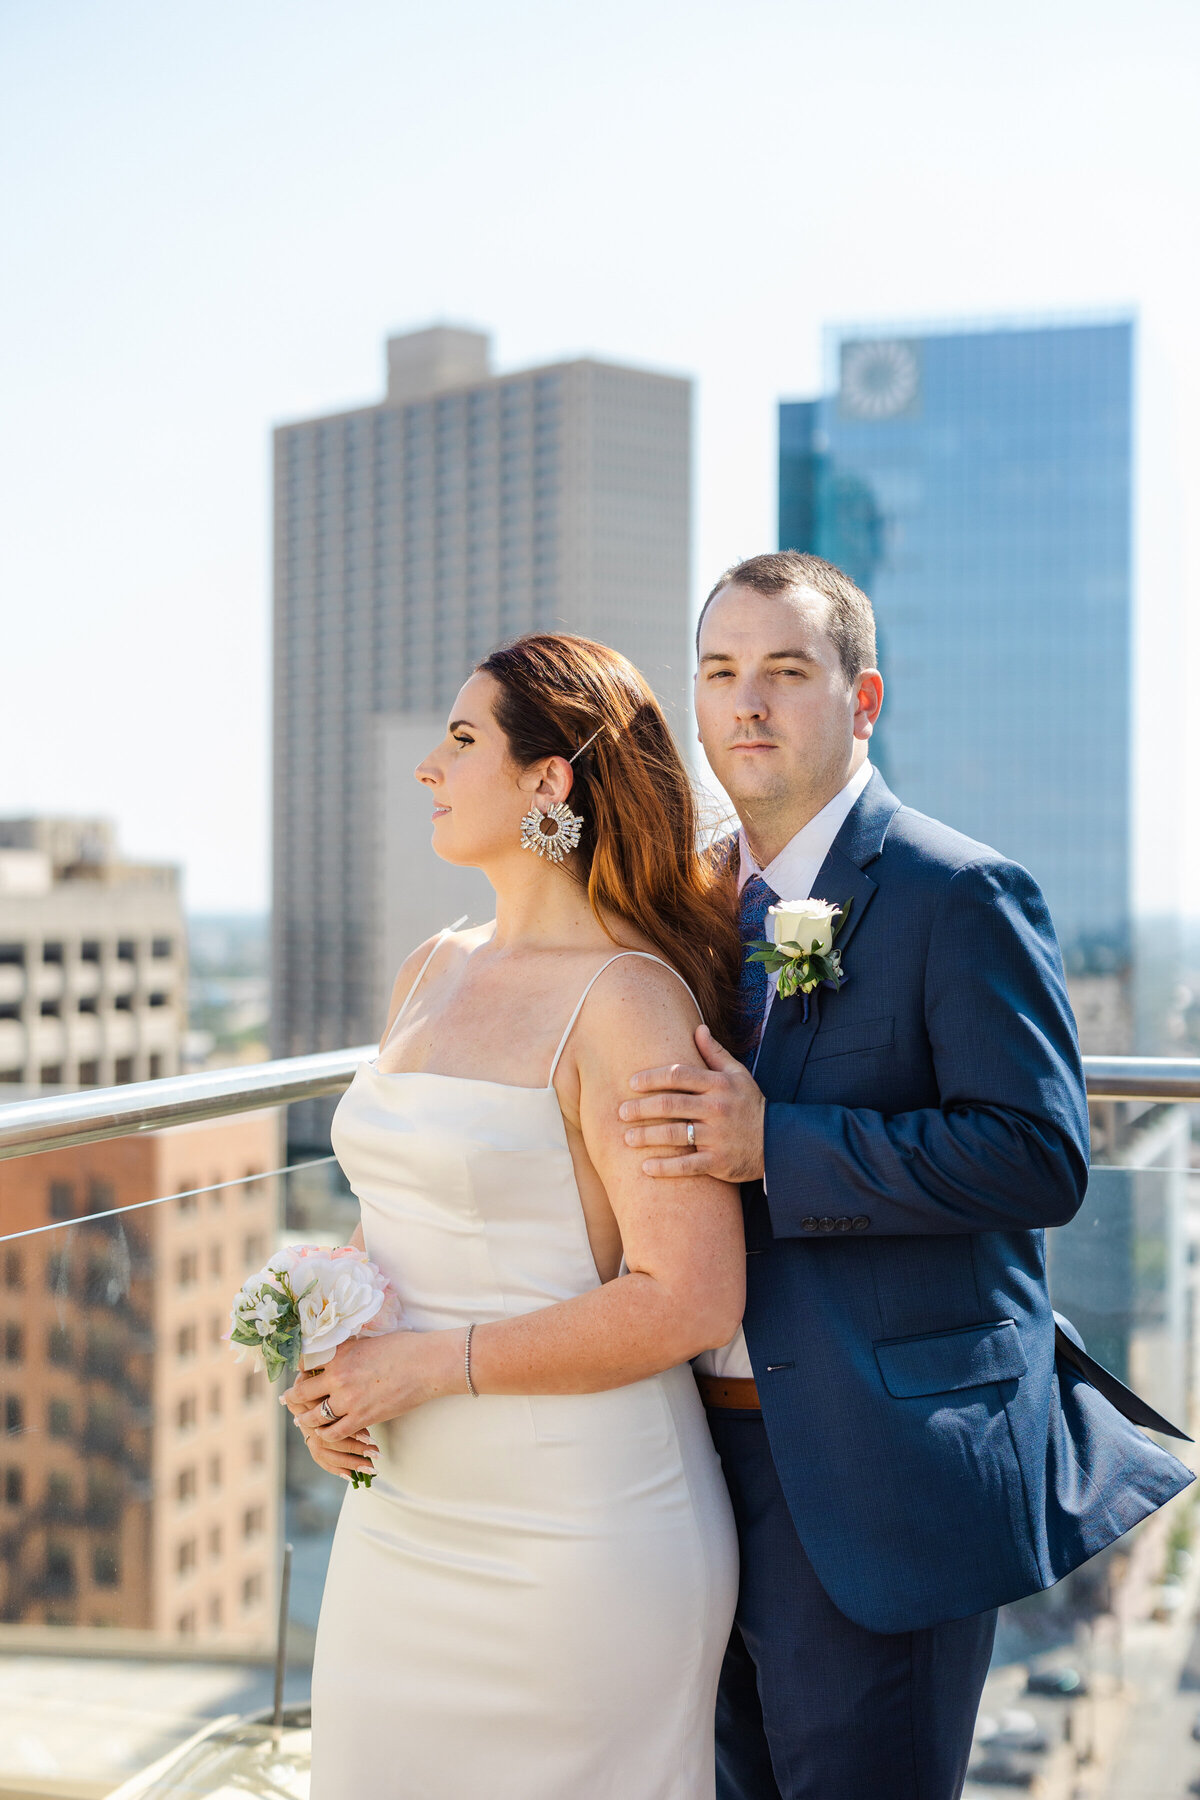 Portrait of a couple posing on the roof of a building in downtown Fort Worth after their elopement ceremony at the Tarrant County Courthouse in Fort Worth, Texas. The bride is on the right and is wearing a sleeveless, white dress and is holding a bouquet. The grooms stands behind her on the right and is wearing a navy suit with a boutonniere. The Fort Worth skyline can be seen in the background.